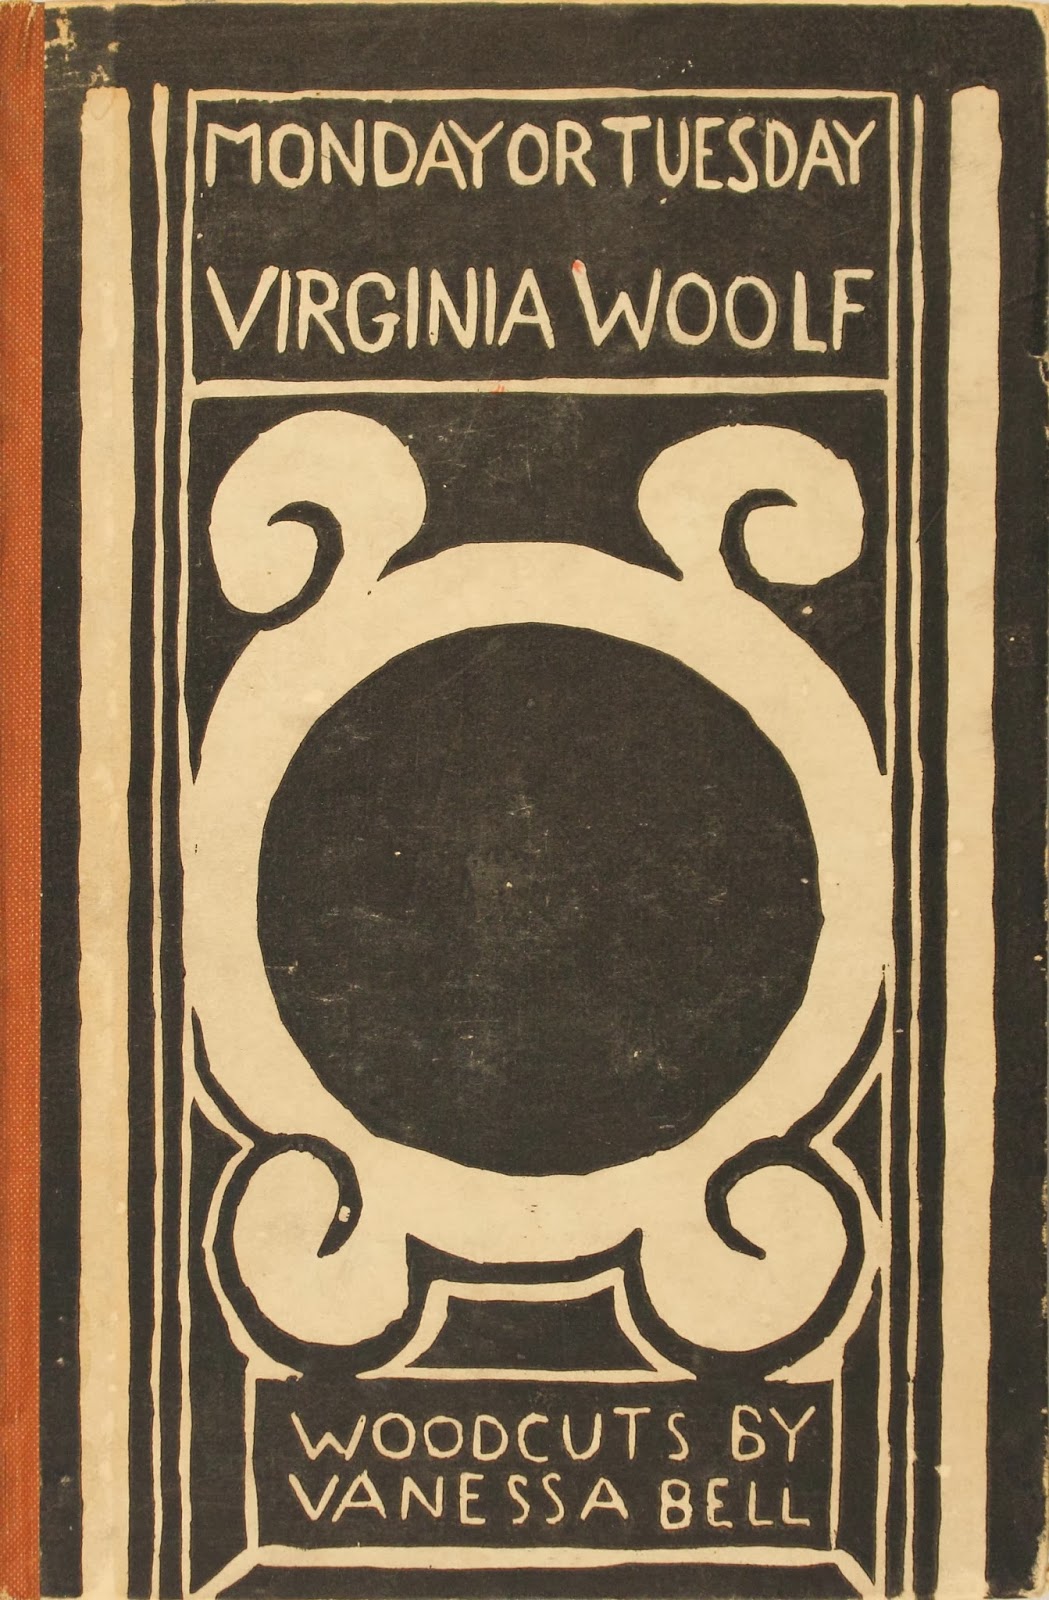 “Monday or Tuesday,” written by Virginia Woolf, illustrated by Vanessa Bell and published by Hogarth Press (the company founded by Woolf and her husband